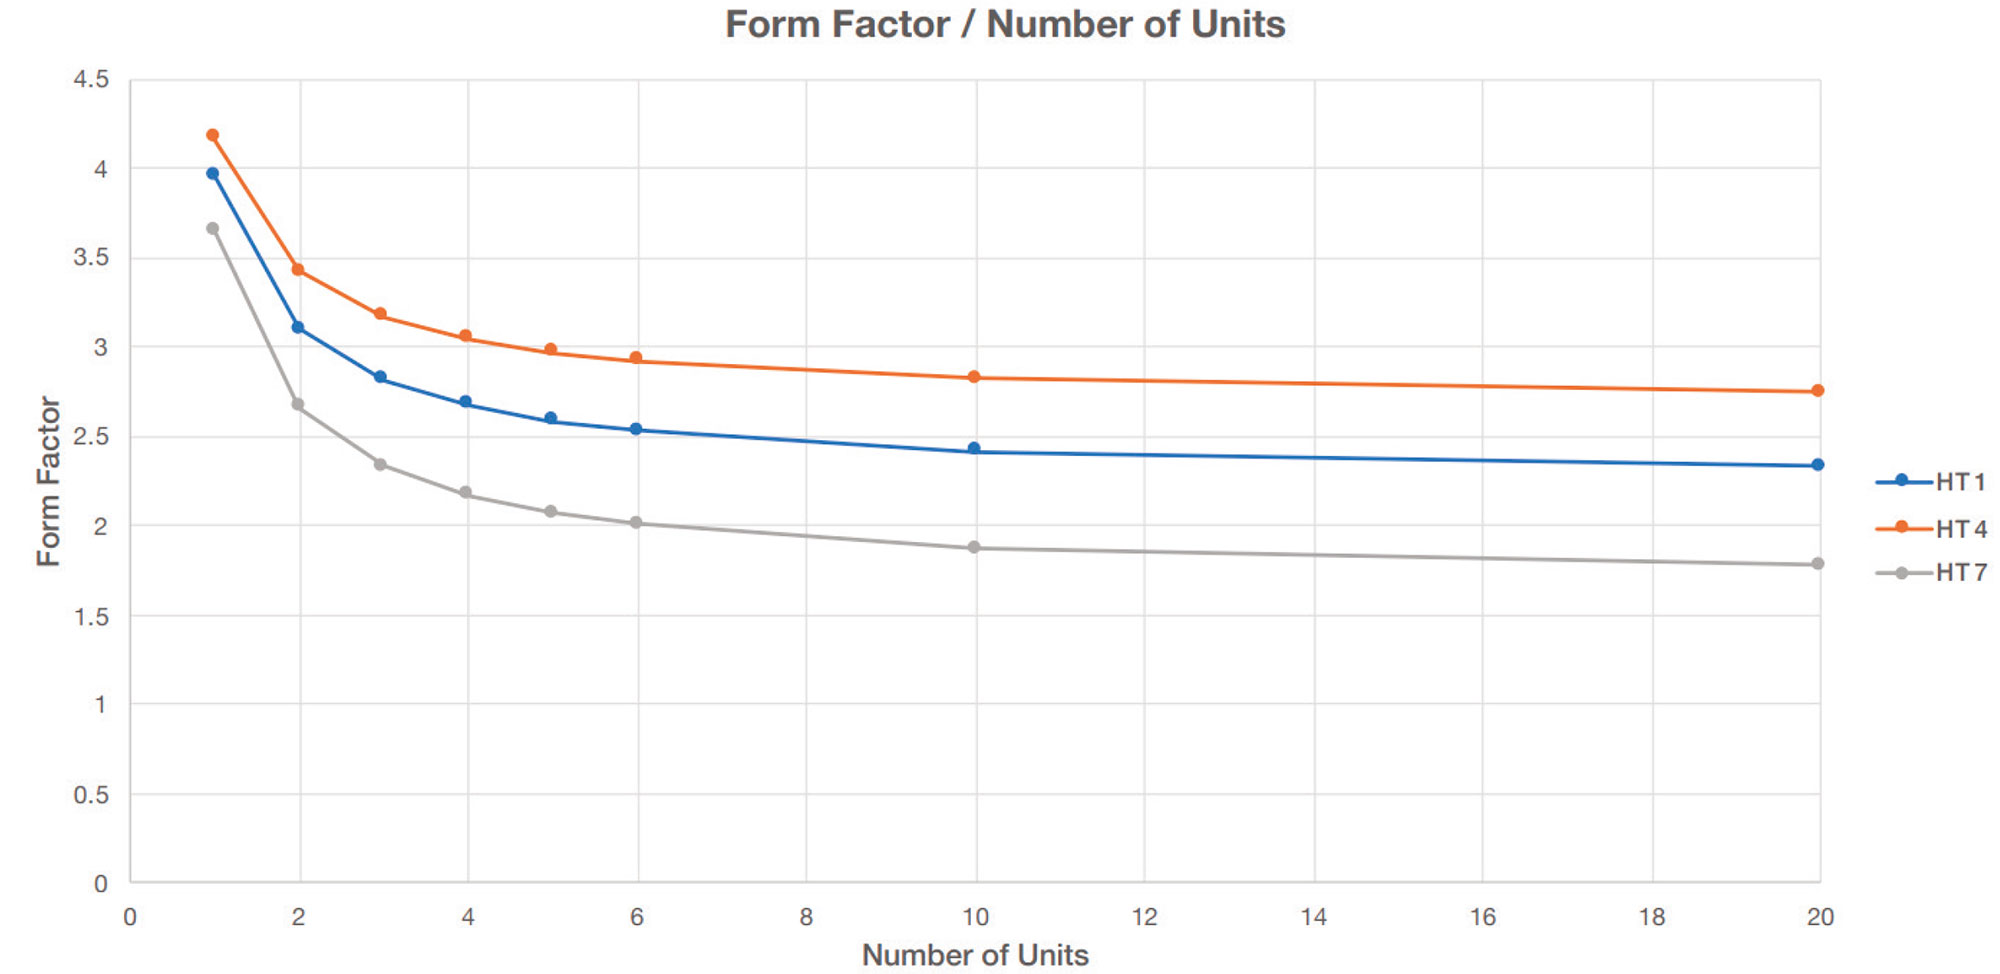 Form factor / number of units in terrace